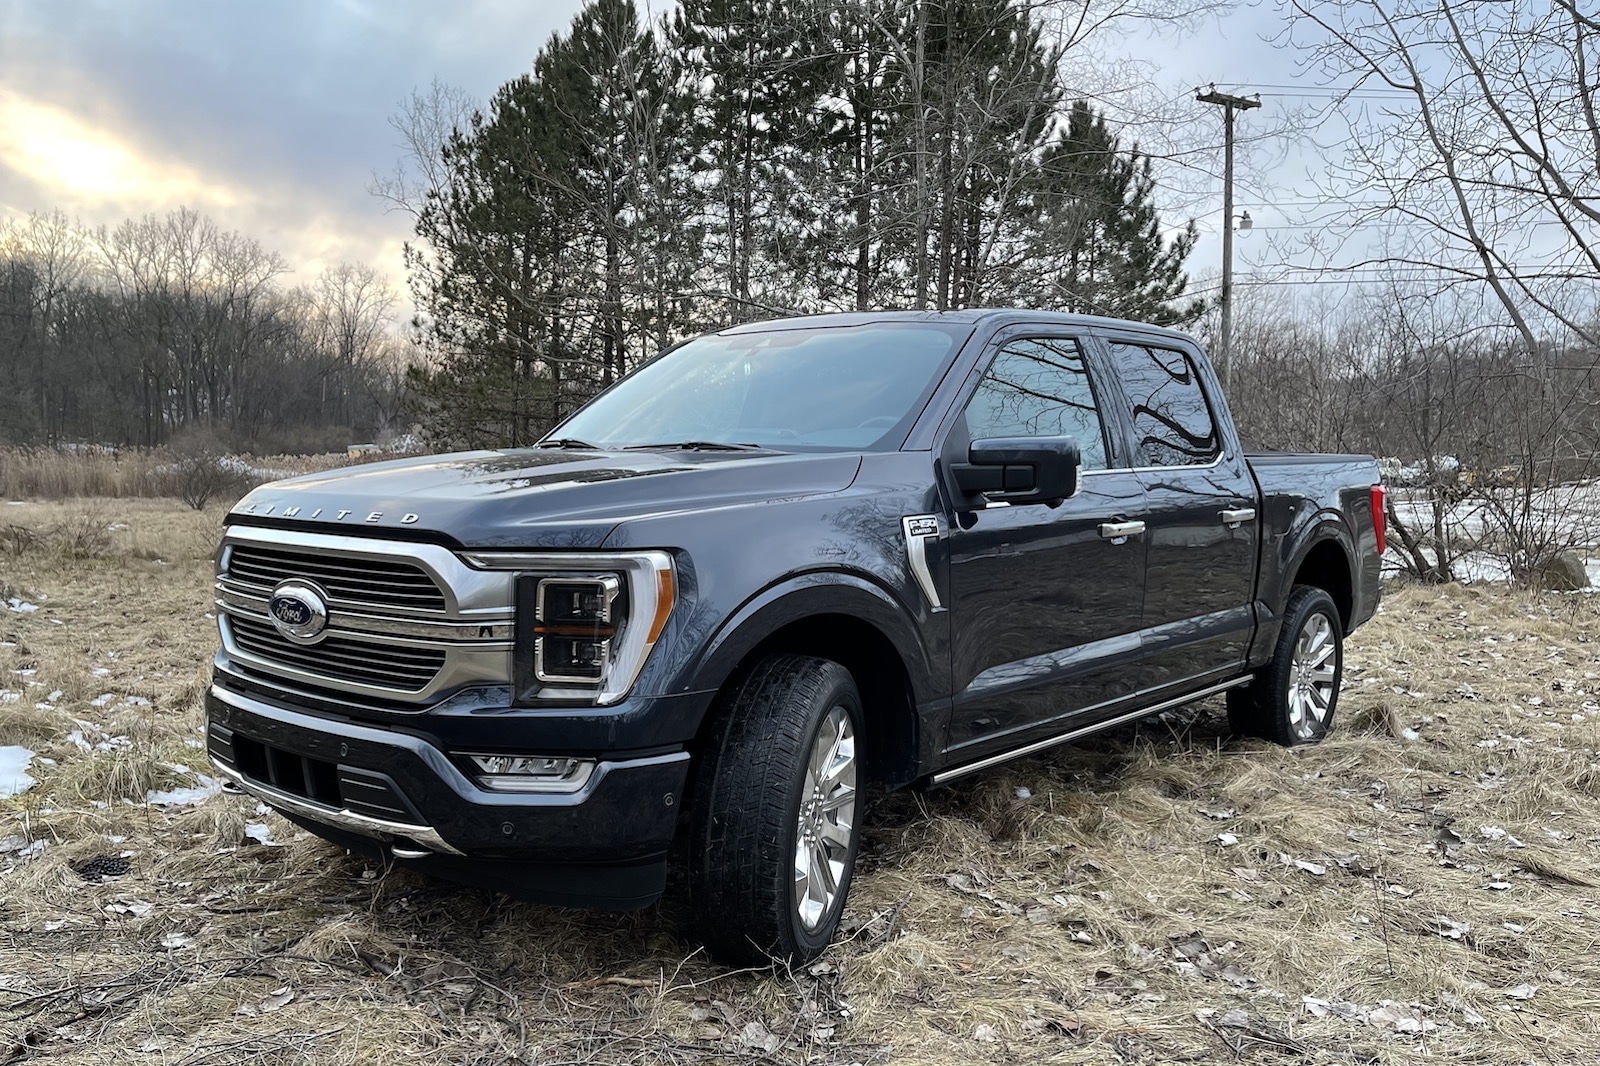 A Week With: 2021 Ford F-150 Limited SuperCrew - The Detroit Bureau